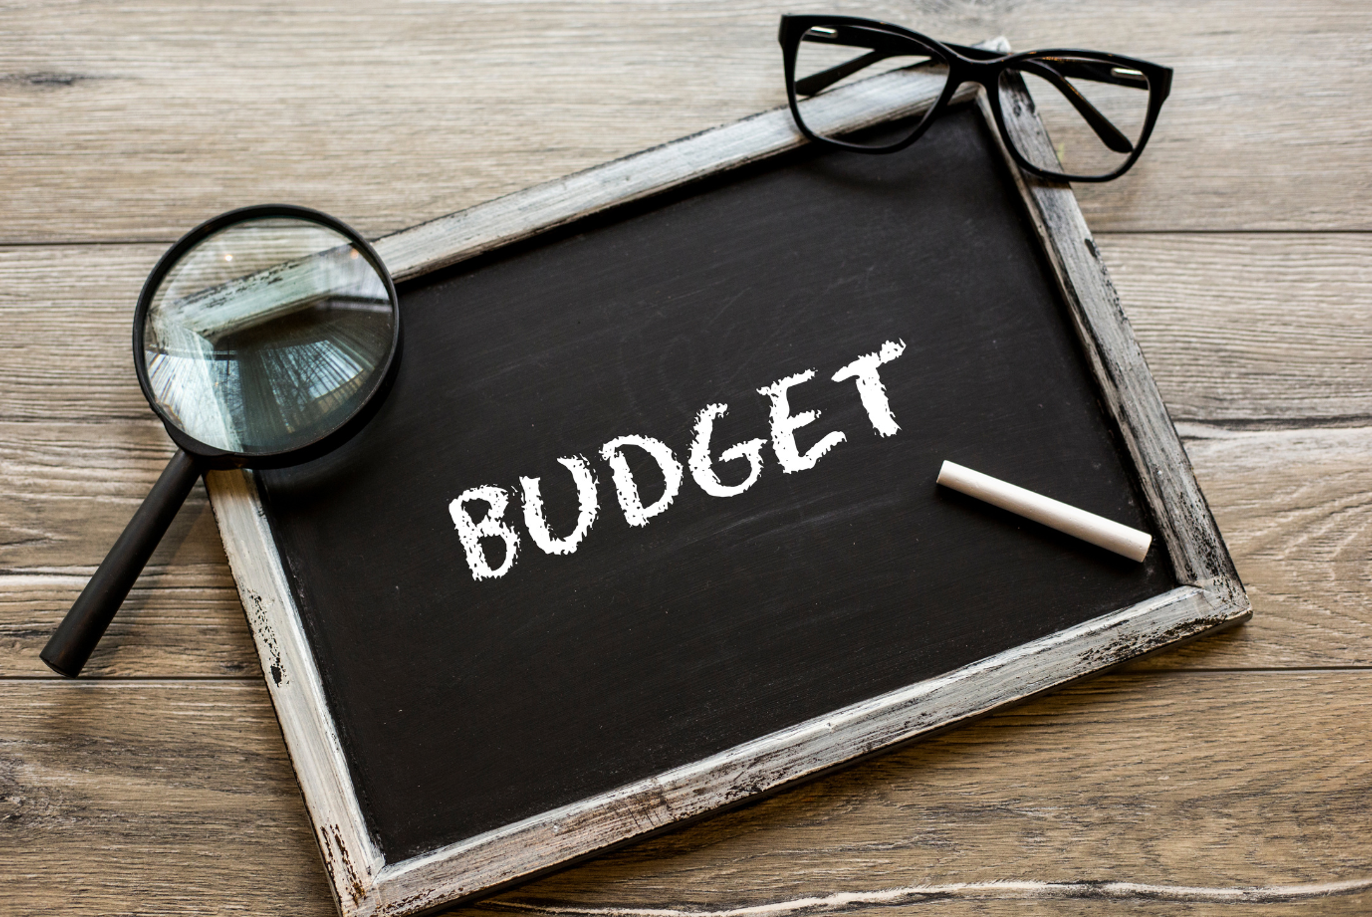 Budget written on a blackboard with a piece of chalk, glasses and magnifier on a wooden background.